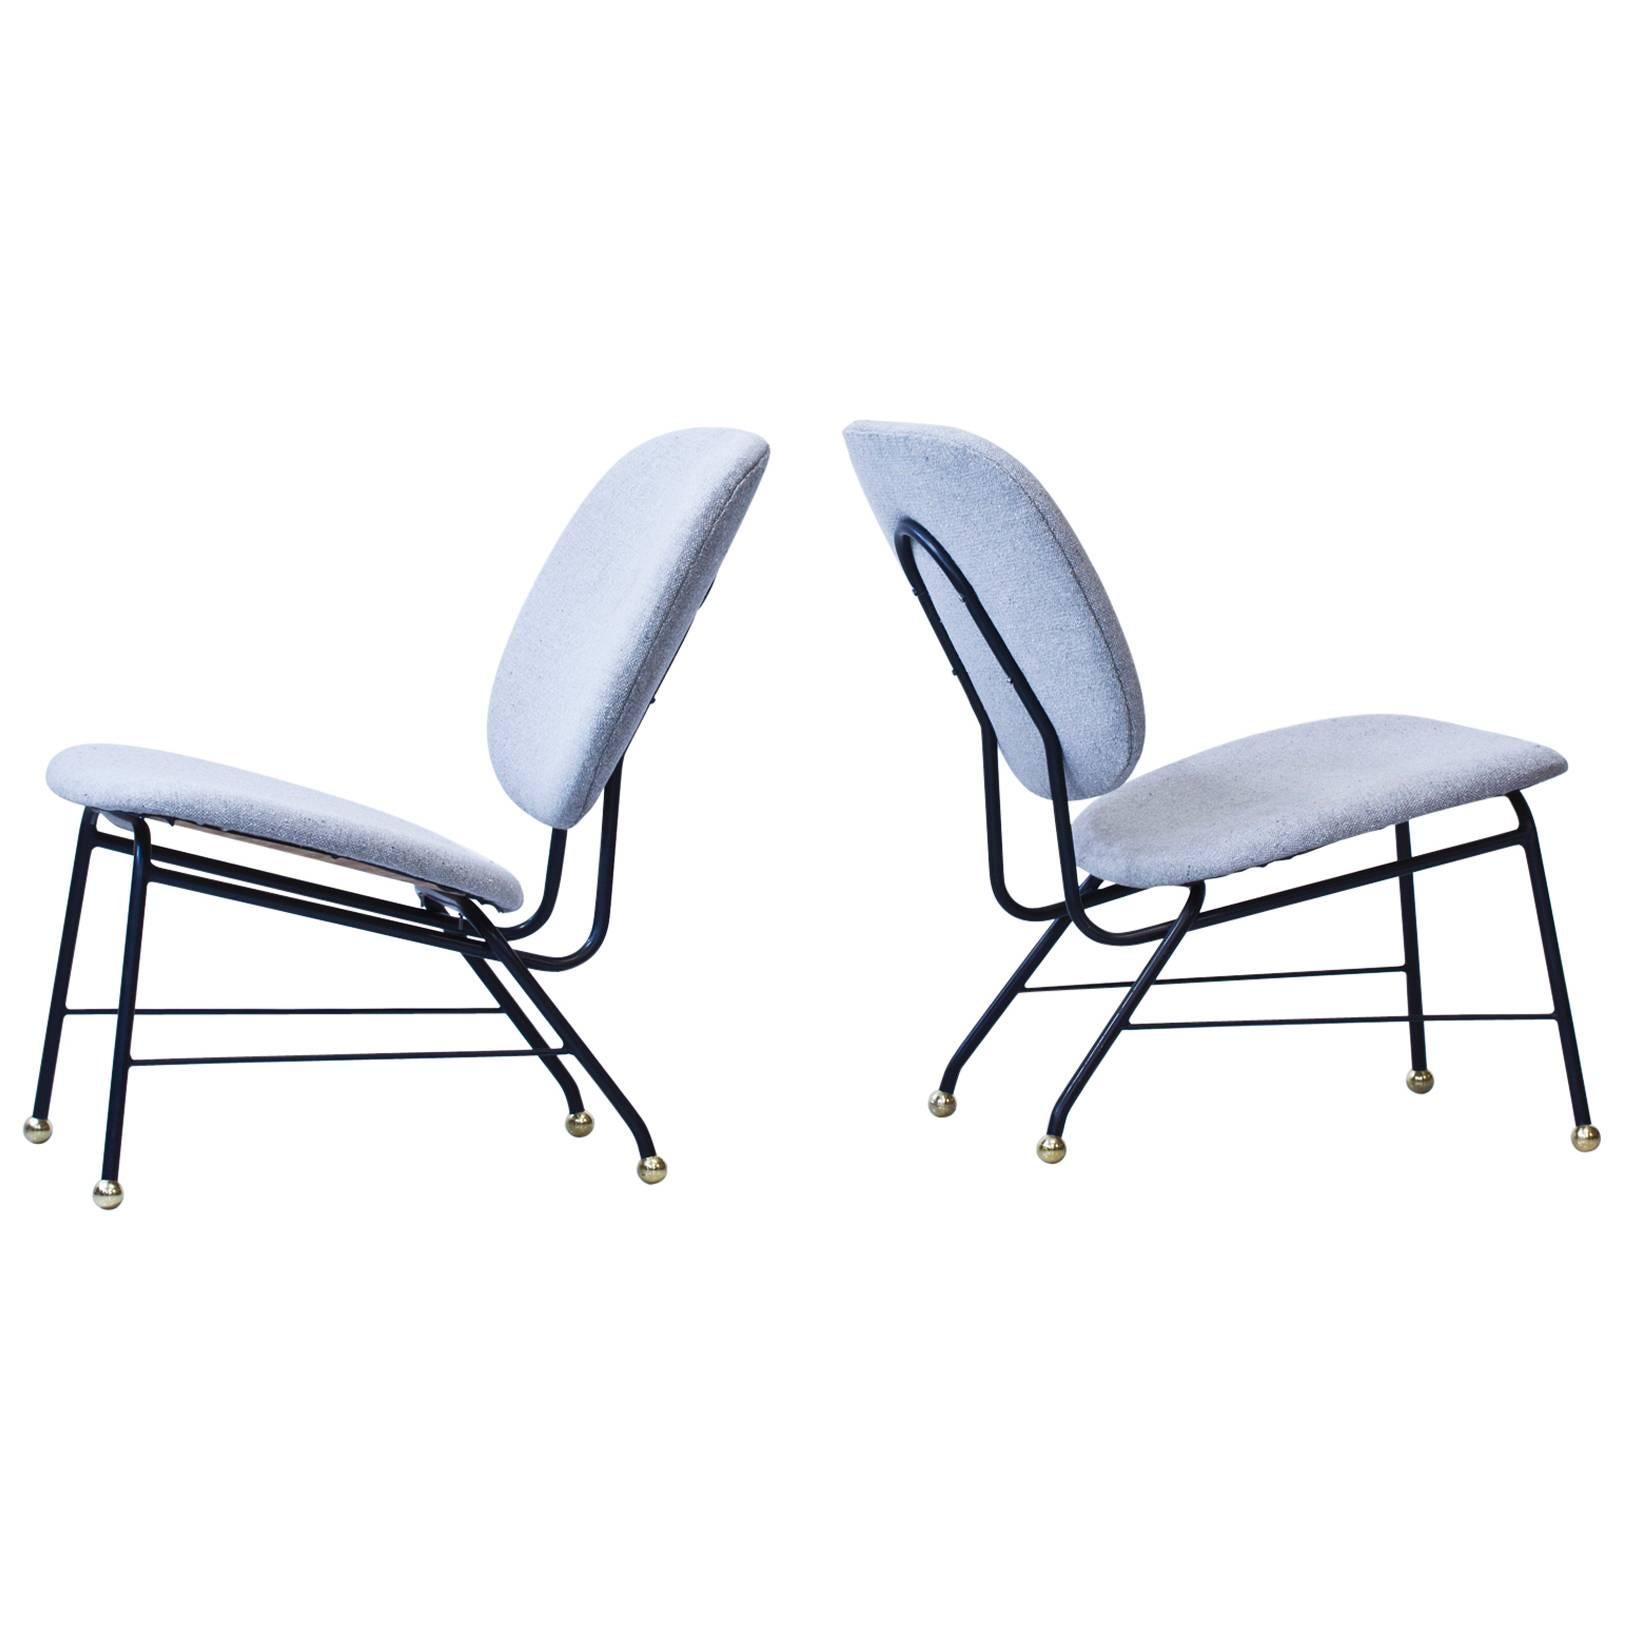 1950s Easy Chairs Attributed to Alf Svensson